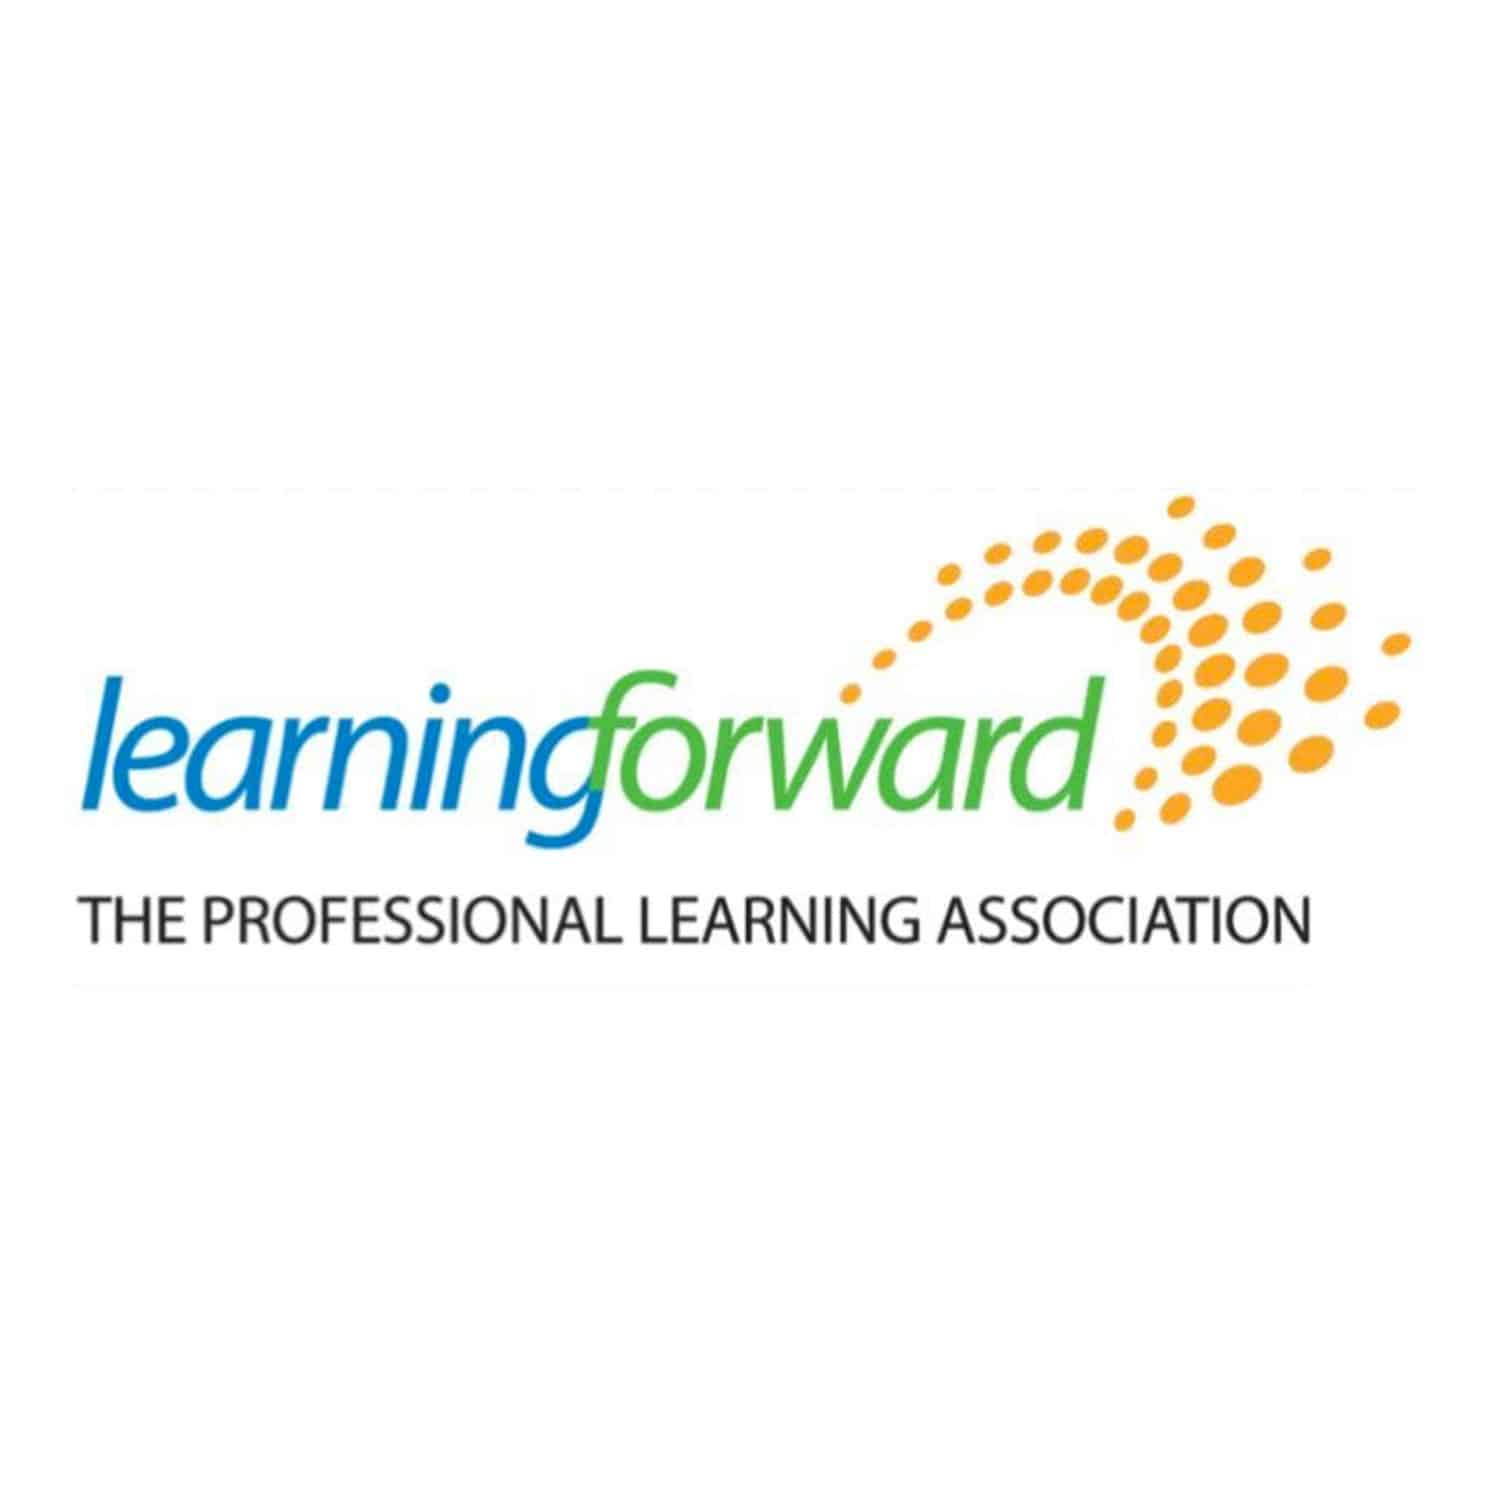 Learning Forward The Professional Learning Association